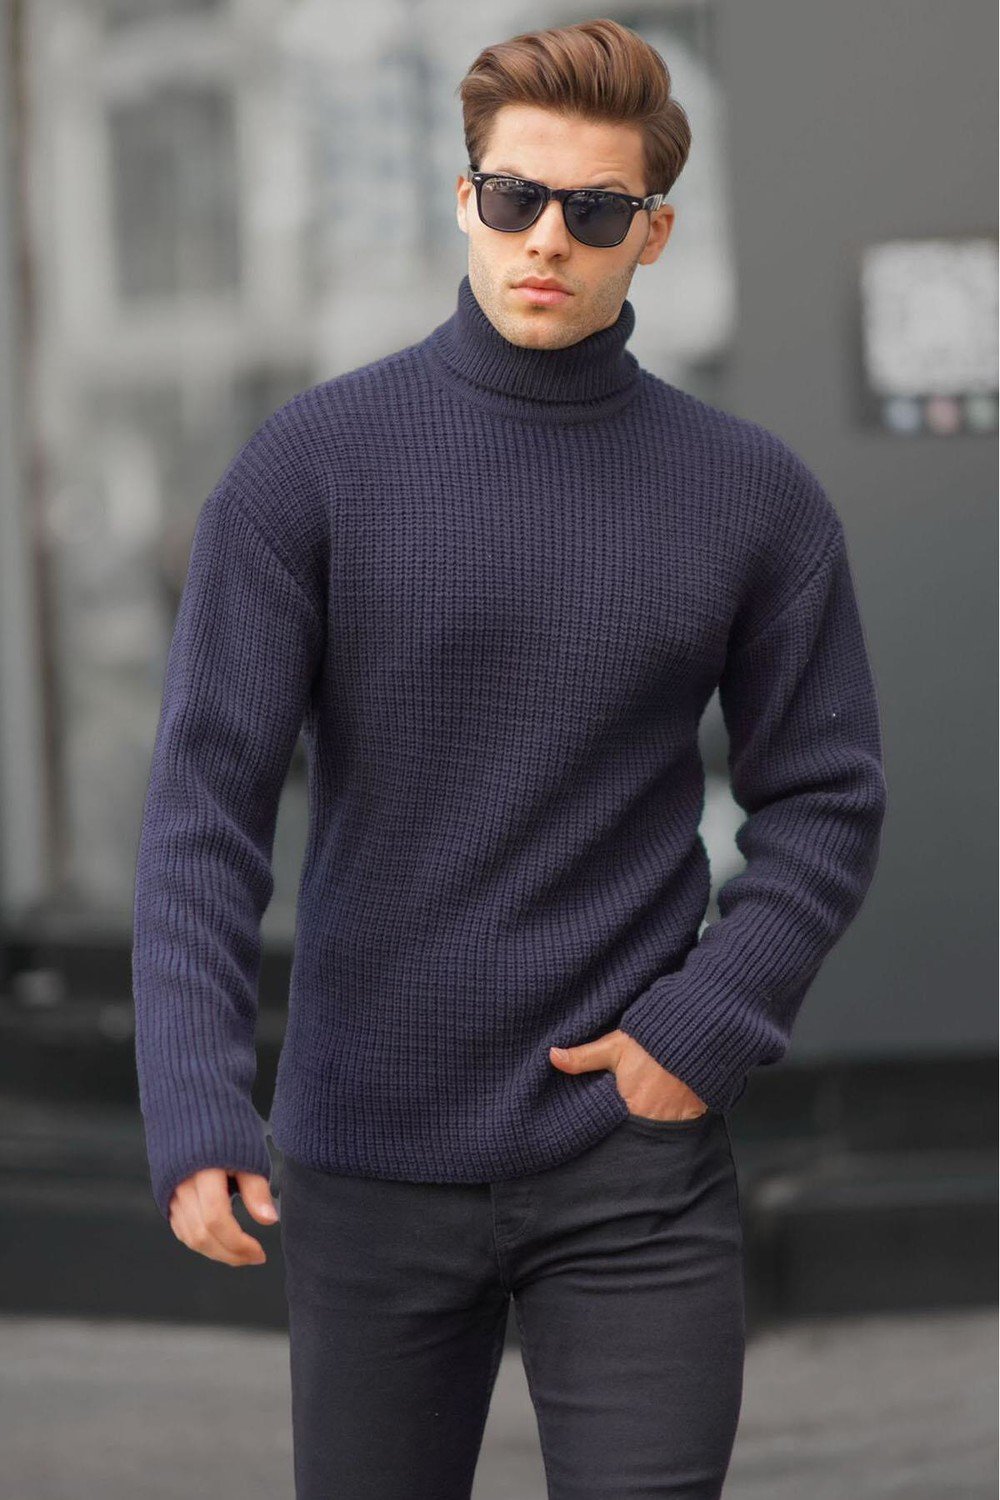 Madmext Navy Blue Turtleneck Knitted Sweater 6858